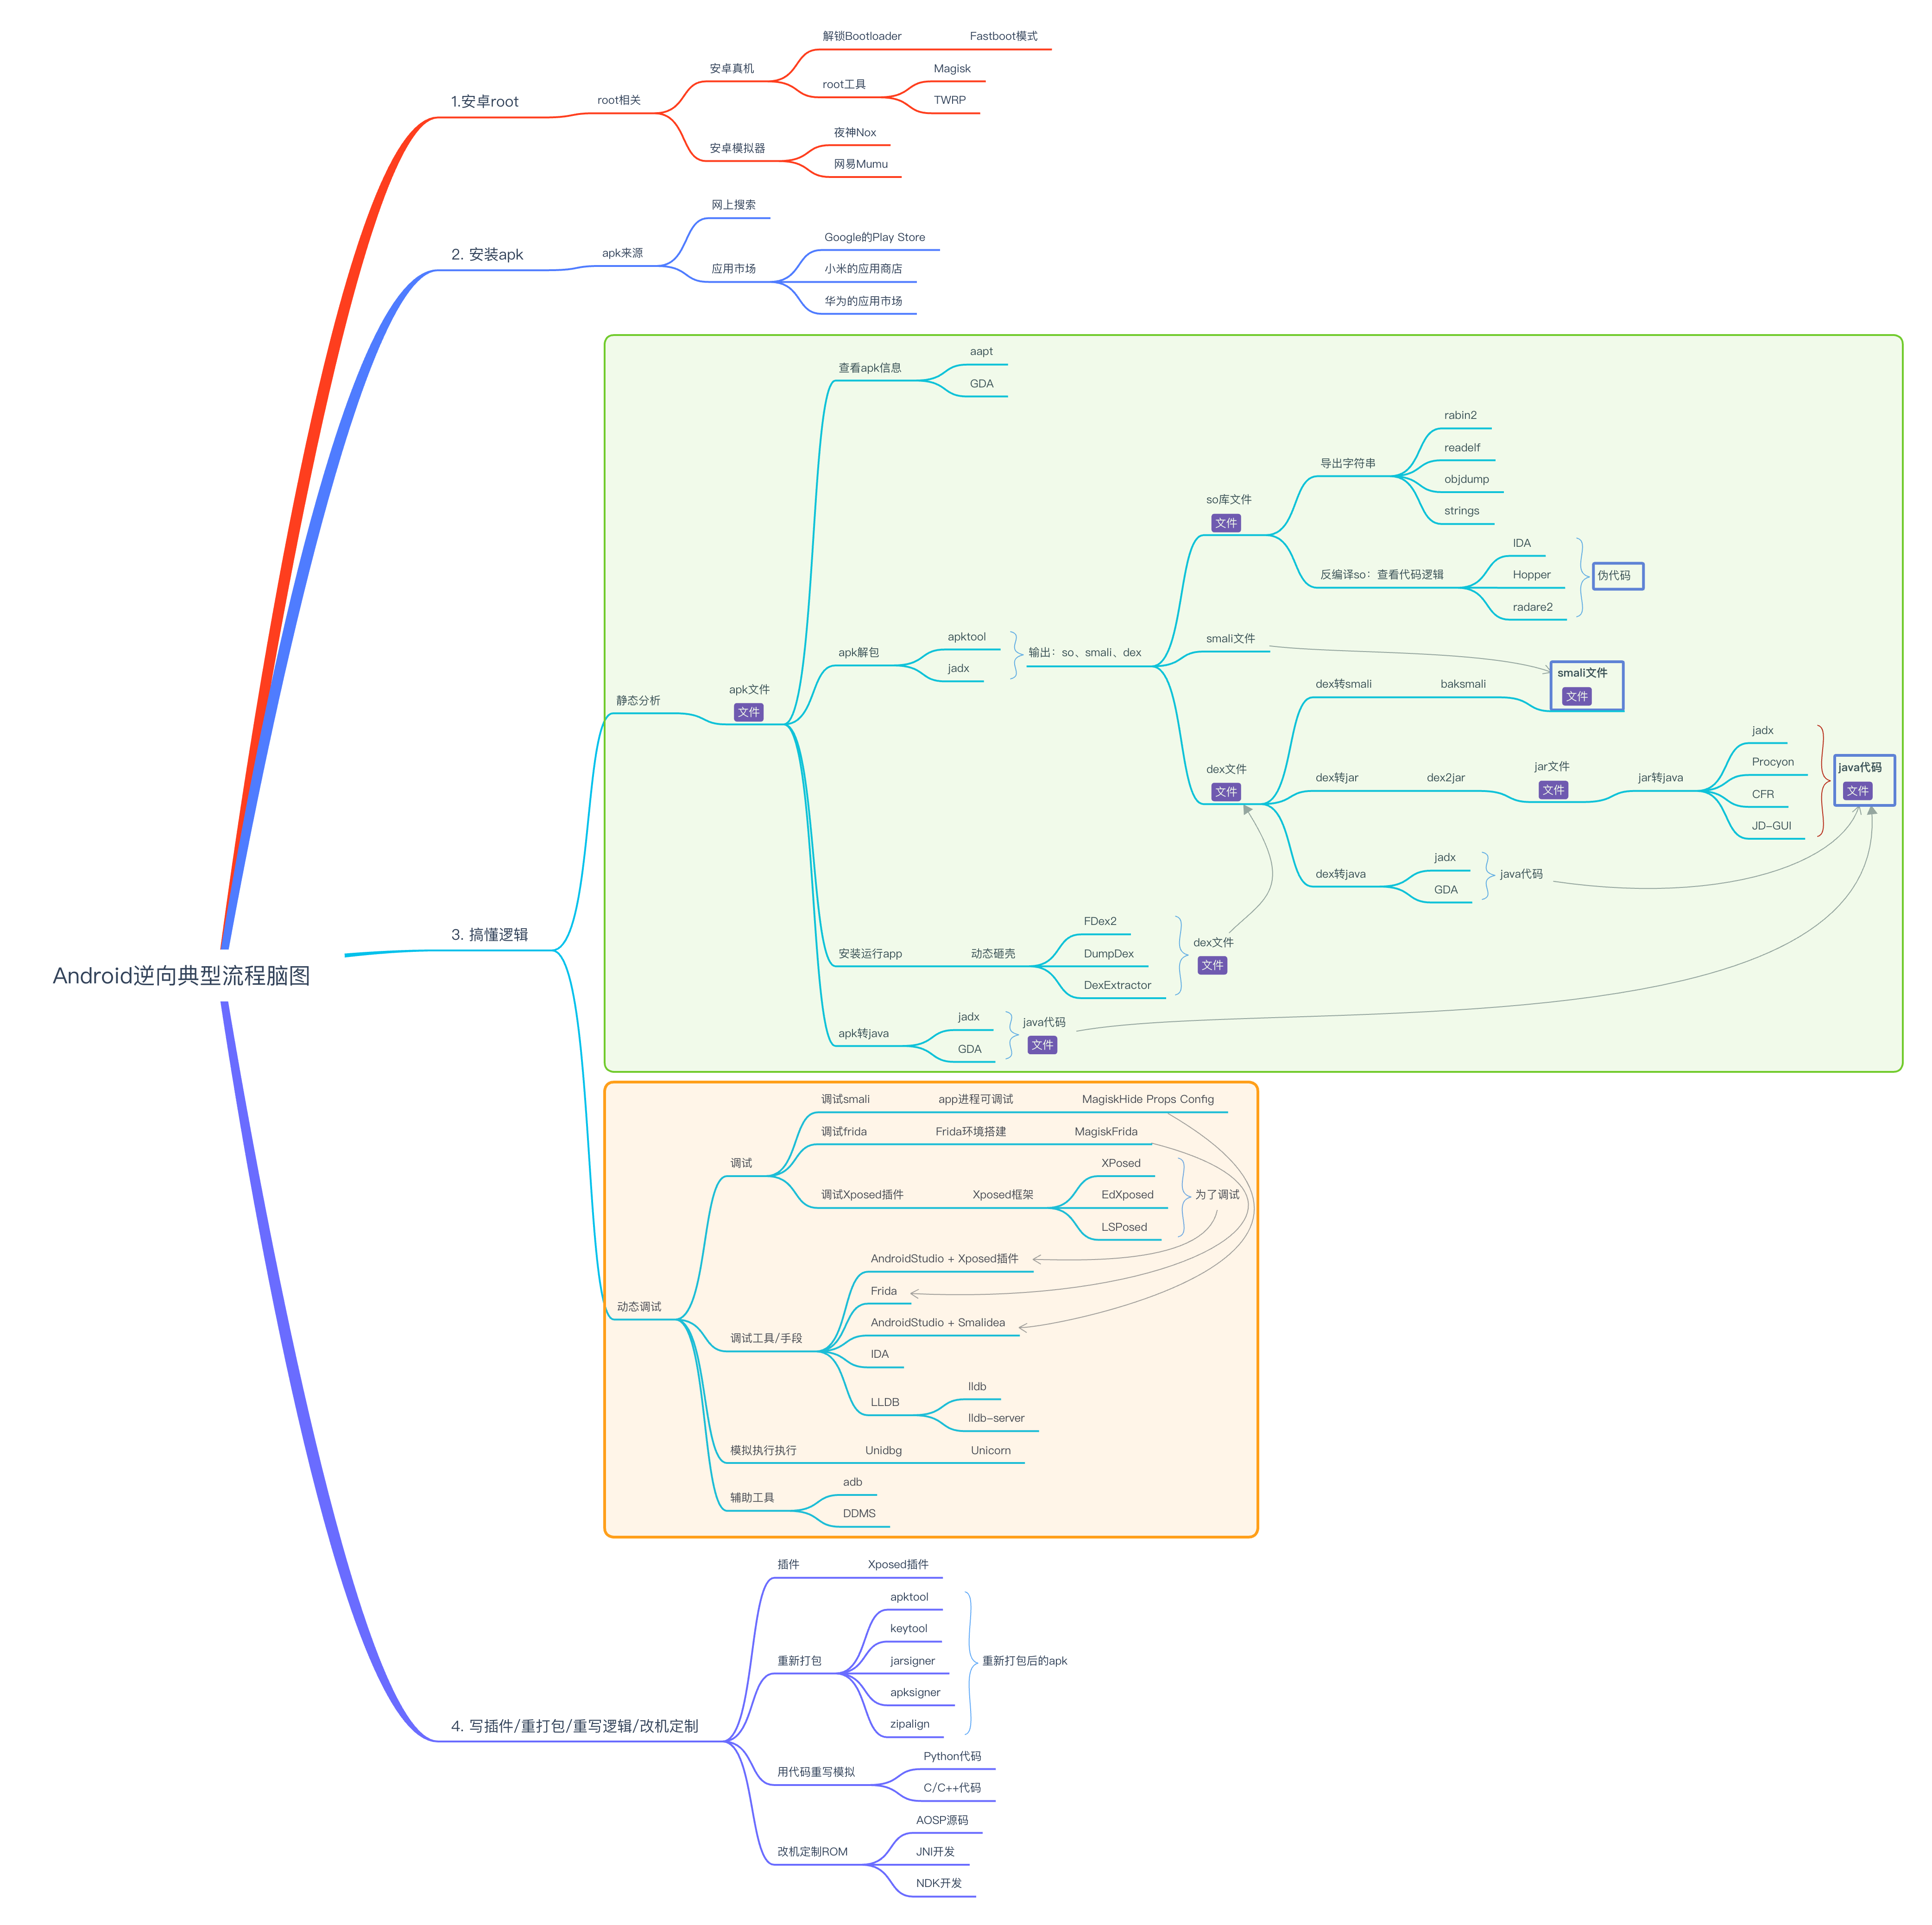 android_typical_process_mindmap